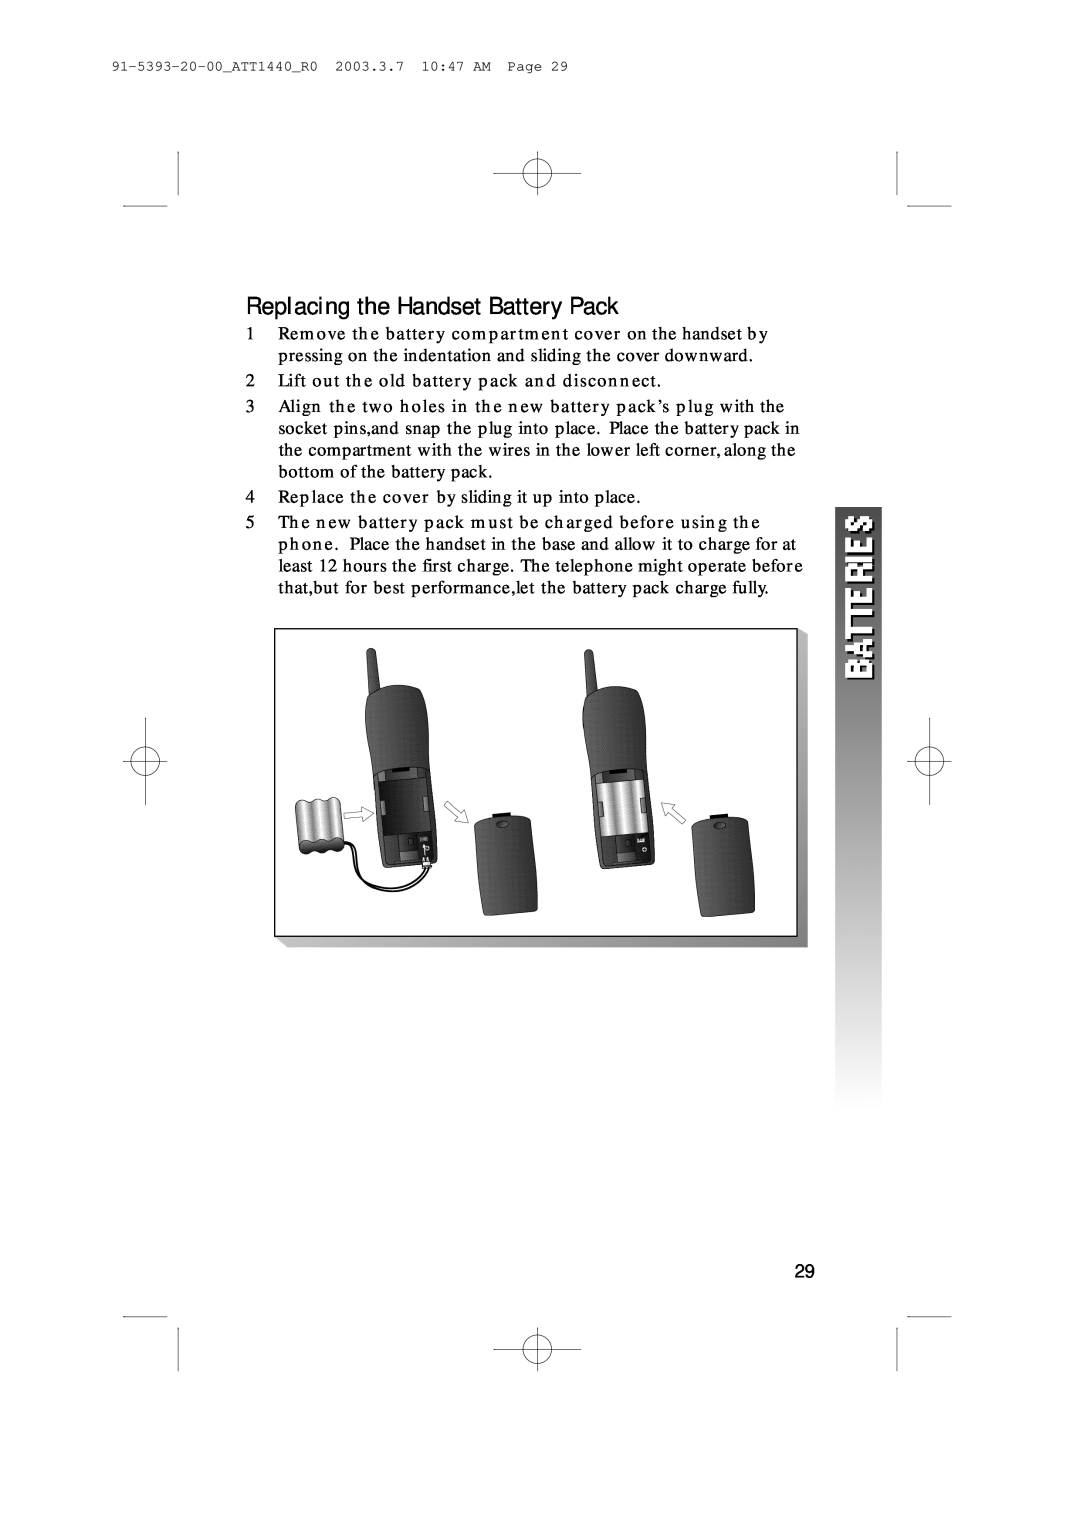 AT&T 1440 user manual Replacing the Handset Battery Pack, Lift out the old battery pack and disconnect 